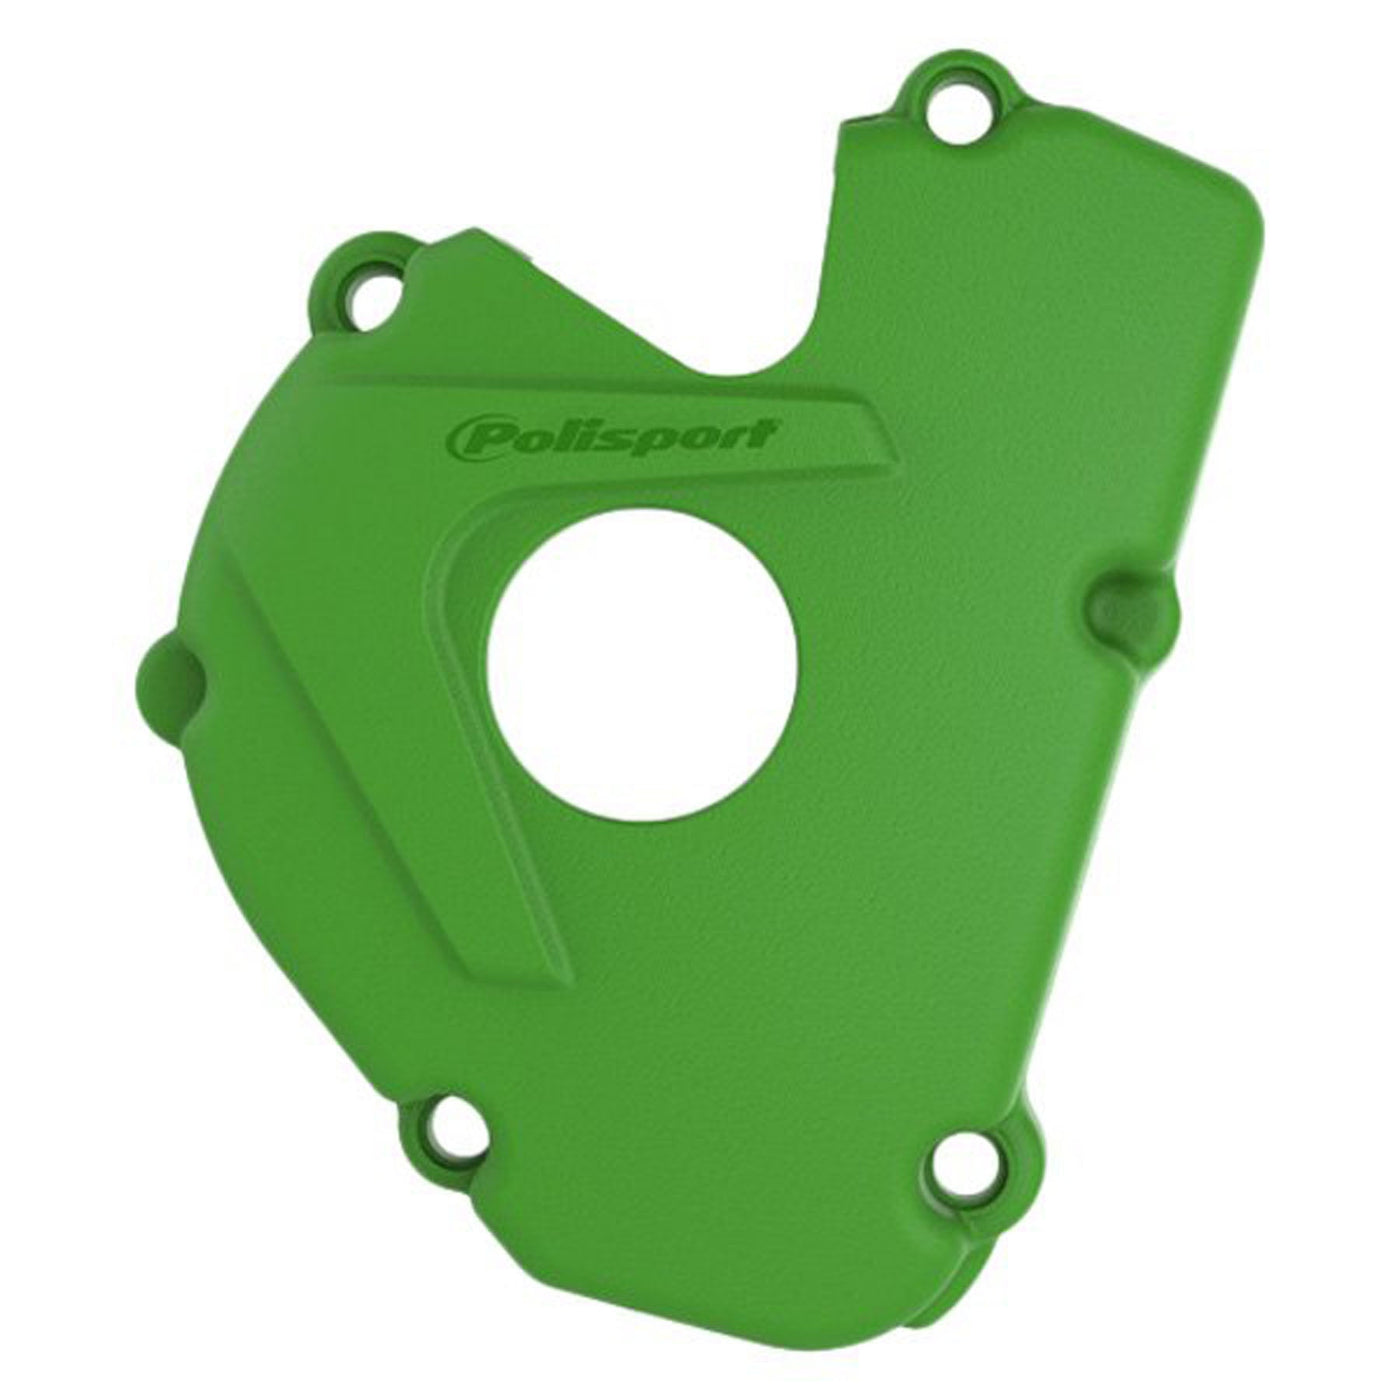 Polisport 8460800002 Ignition Cover Protector - Green #8460800002